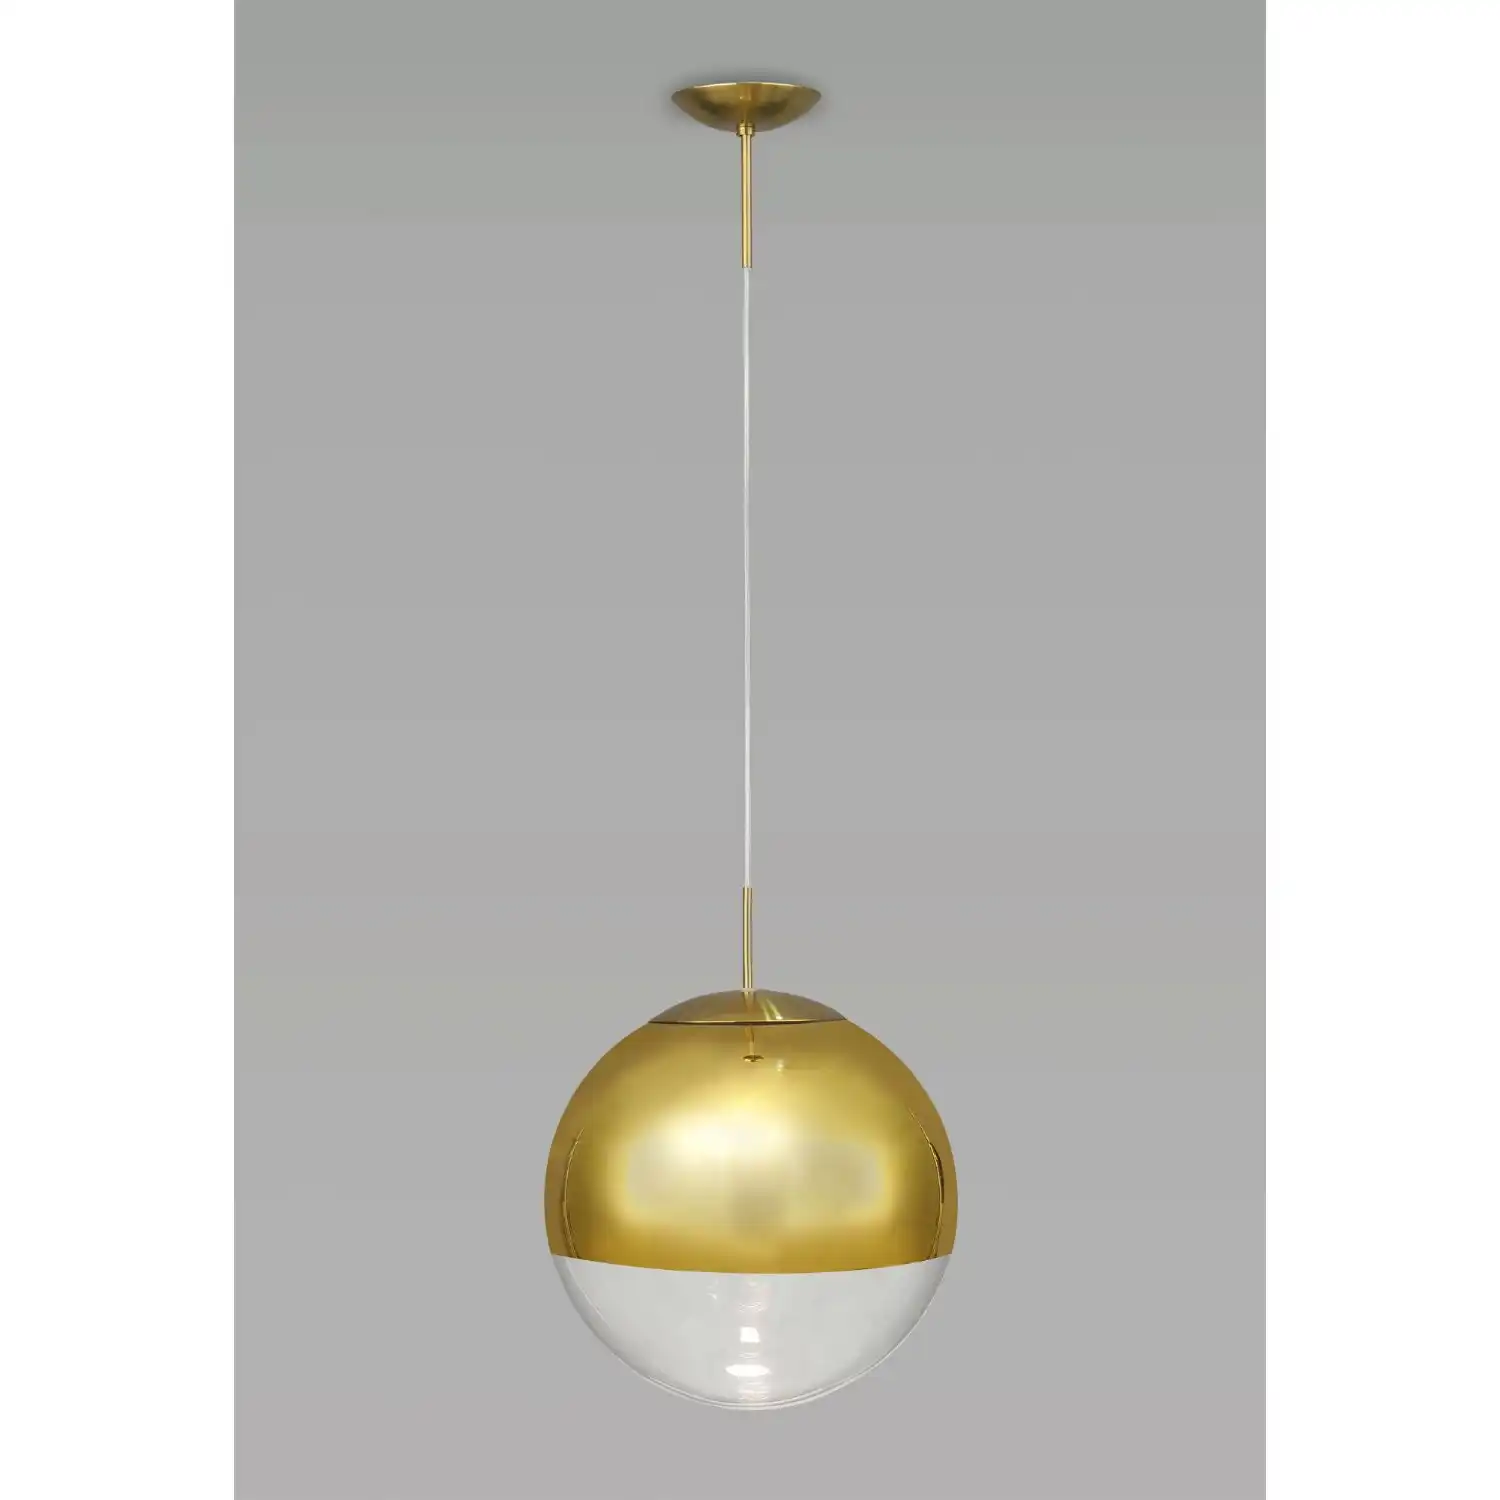 Miranda Large Ball Pendant 1 Light E27 Antique Gold Suspension with Gold Mirrored Clear Glass Globe